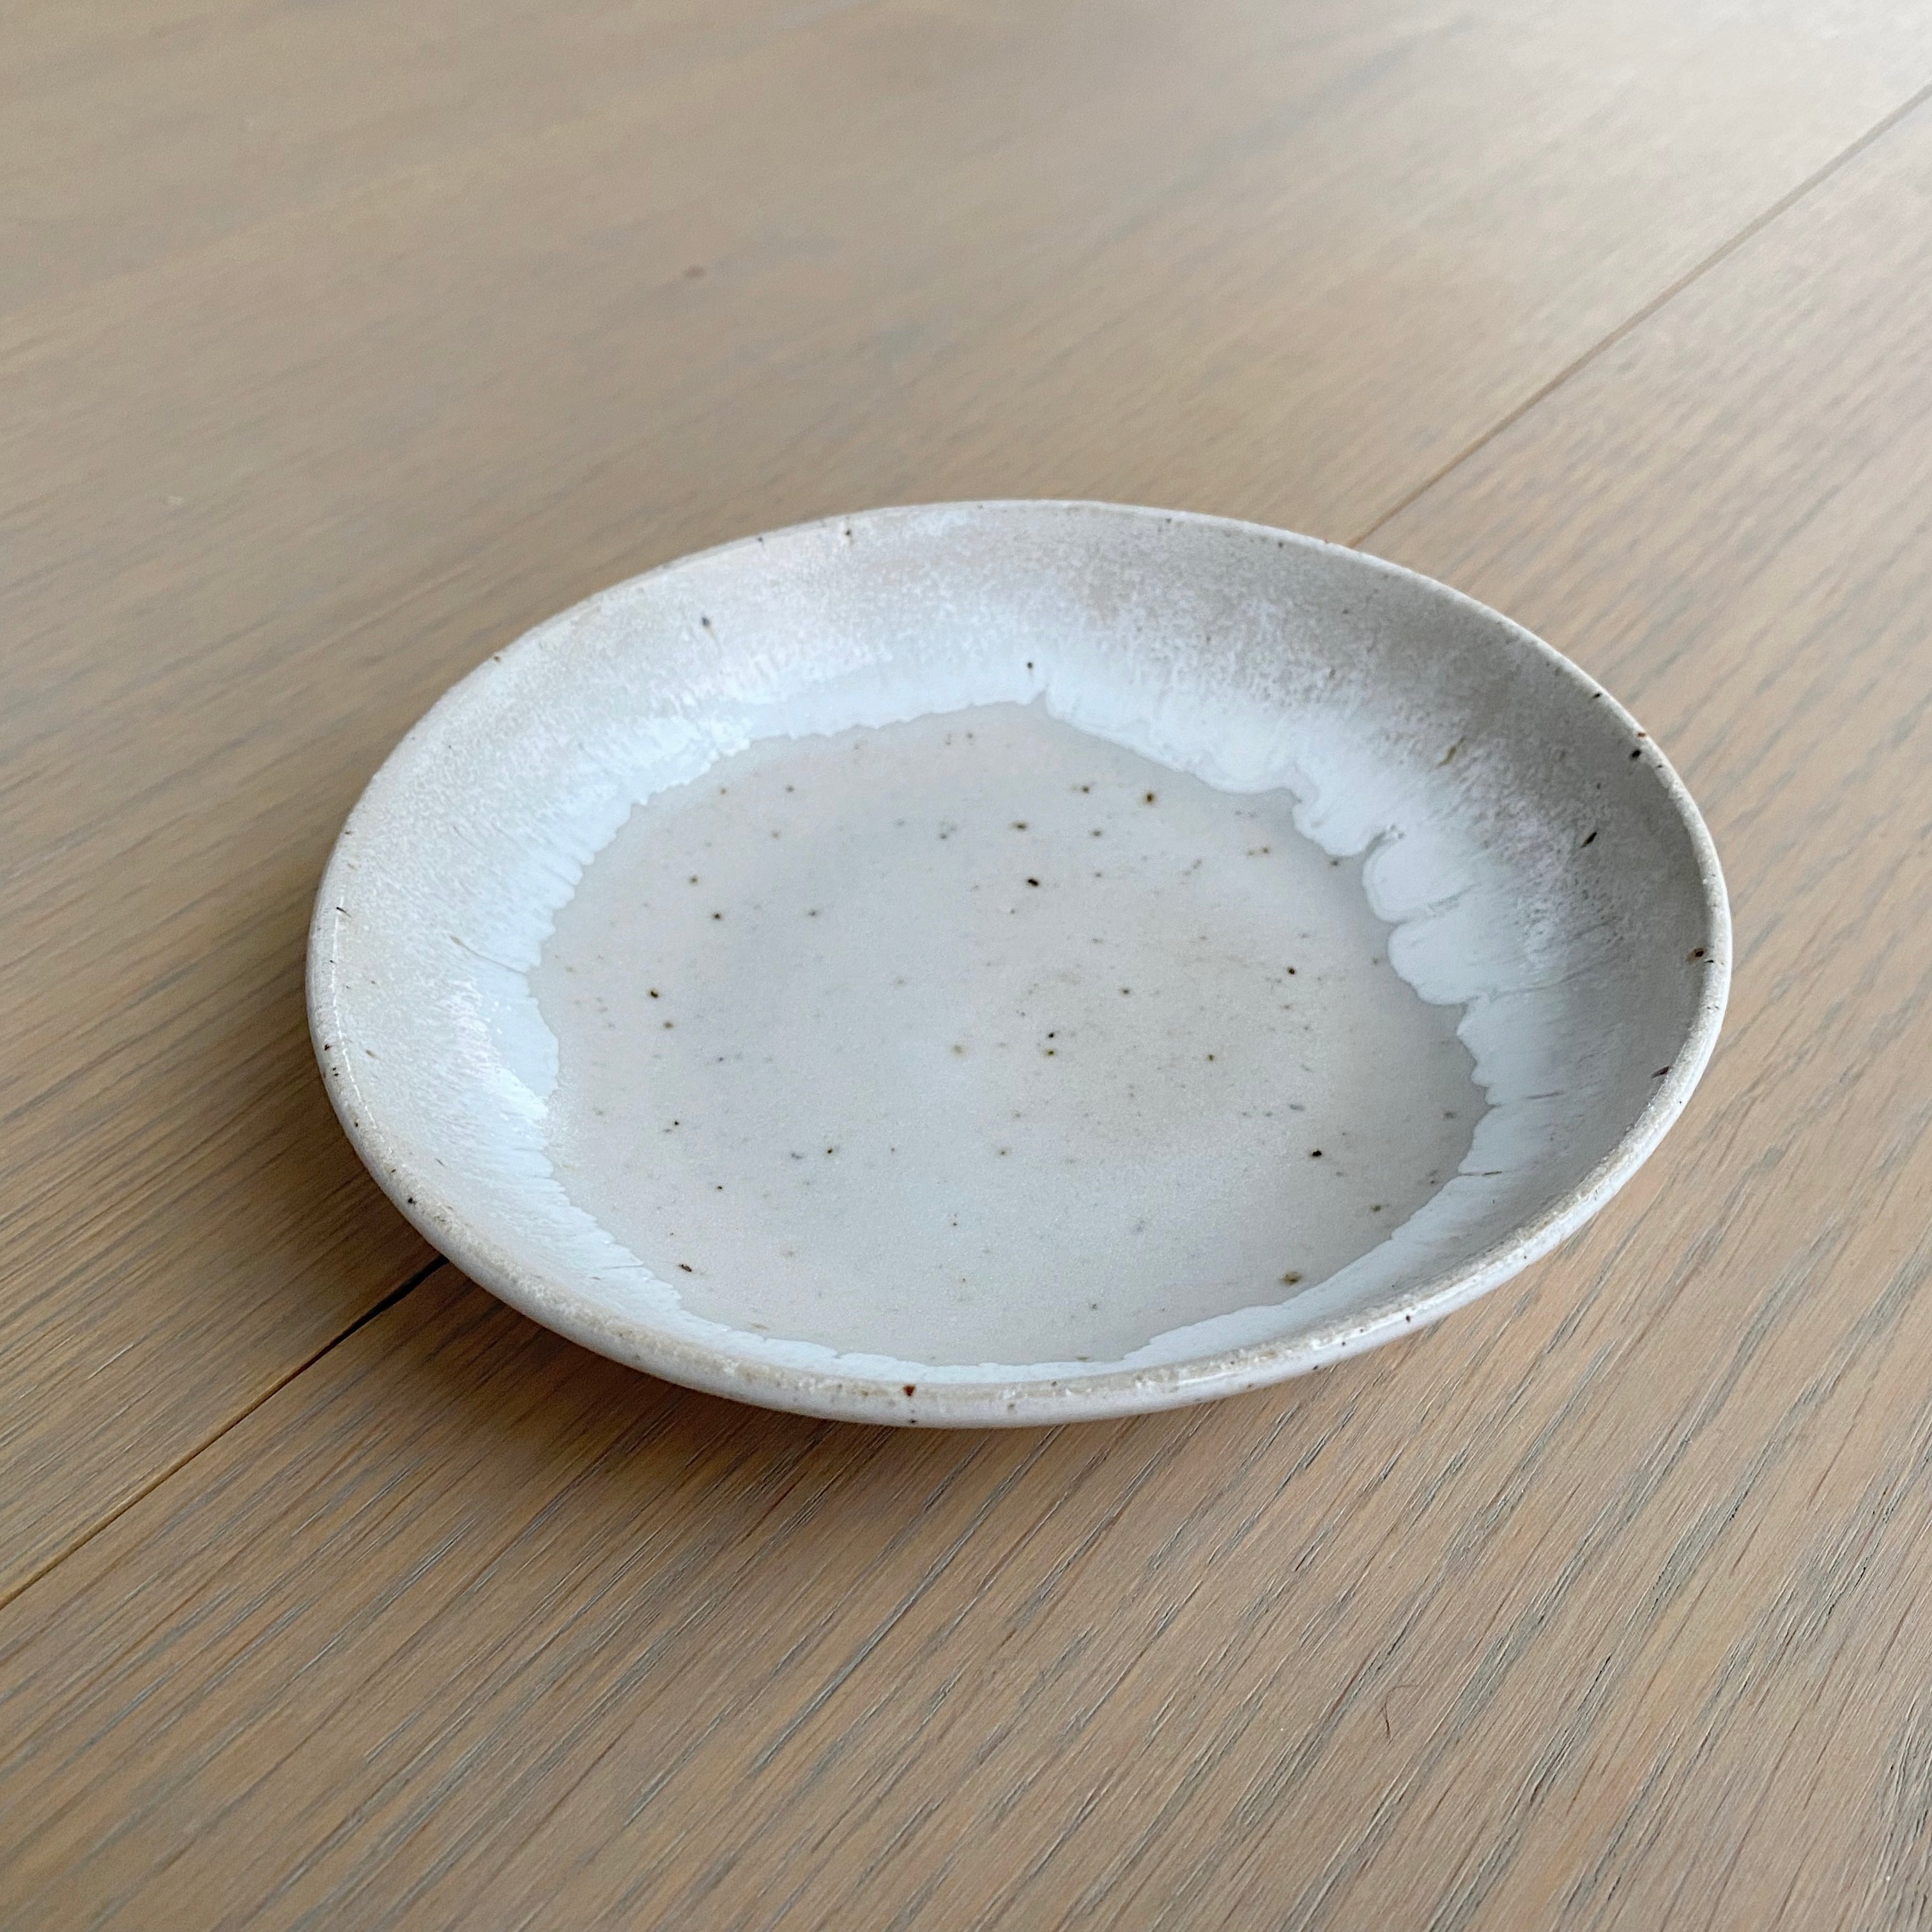 Tasja P small (low) breakfast bowl - off white and white